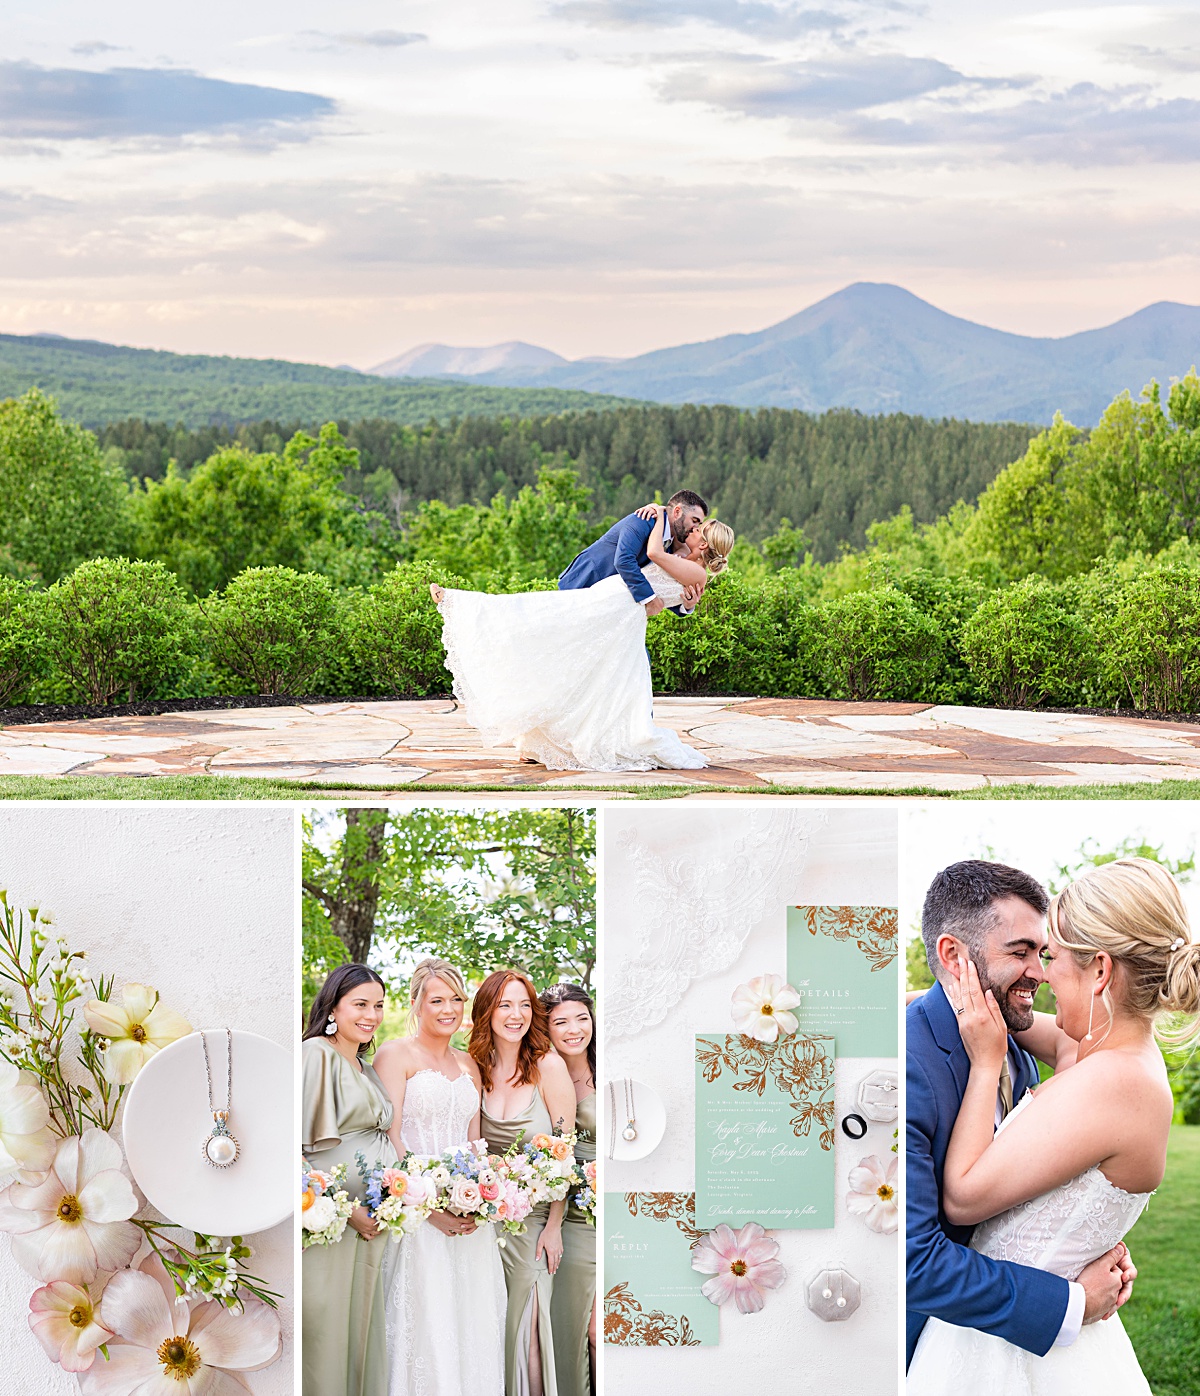 This rustic elegance wedding at The Seclusion features the sweetest groom reaction during the ceremony, carefully selected family heirlooms, wildflowers, and one of my favorite sunsets at The Seclusion in Lexington, Virginia.